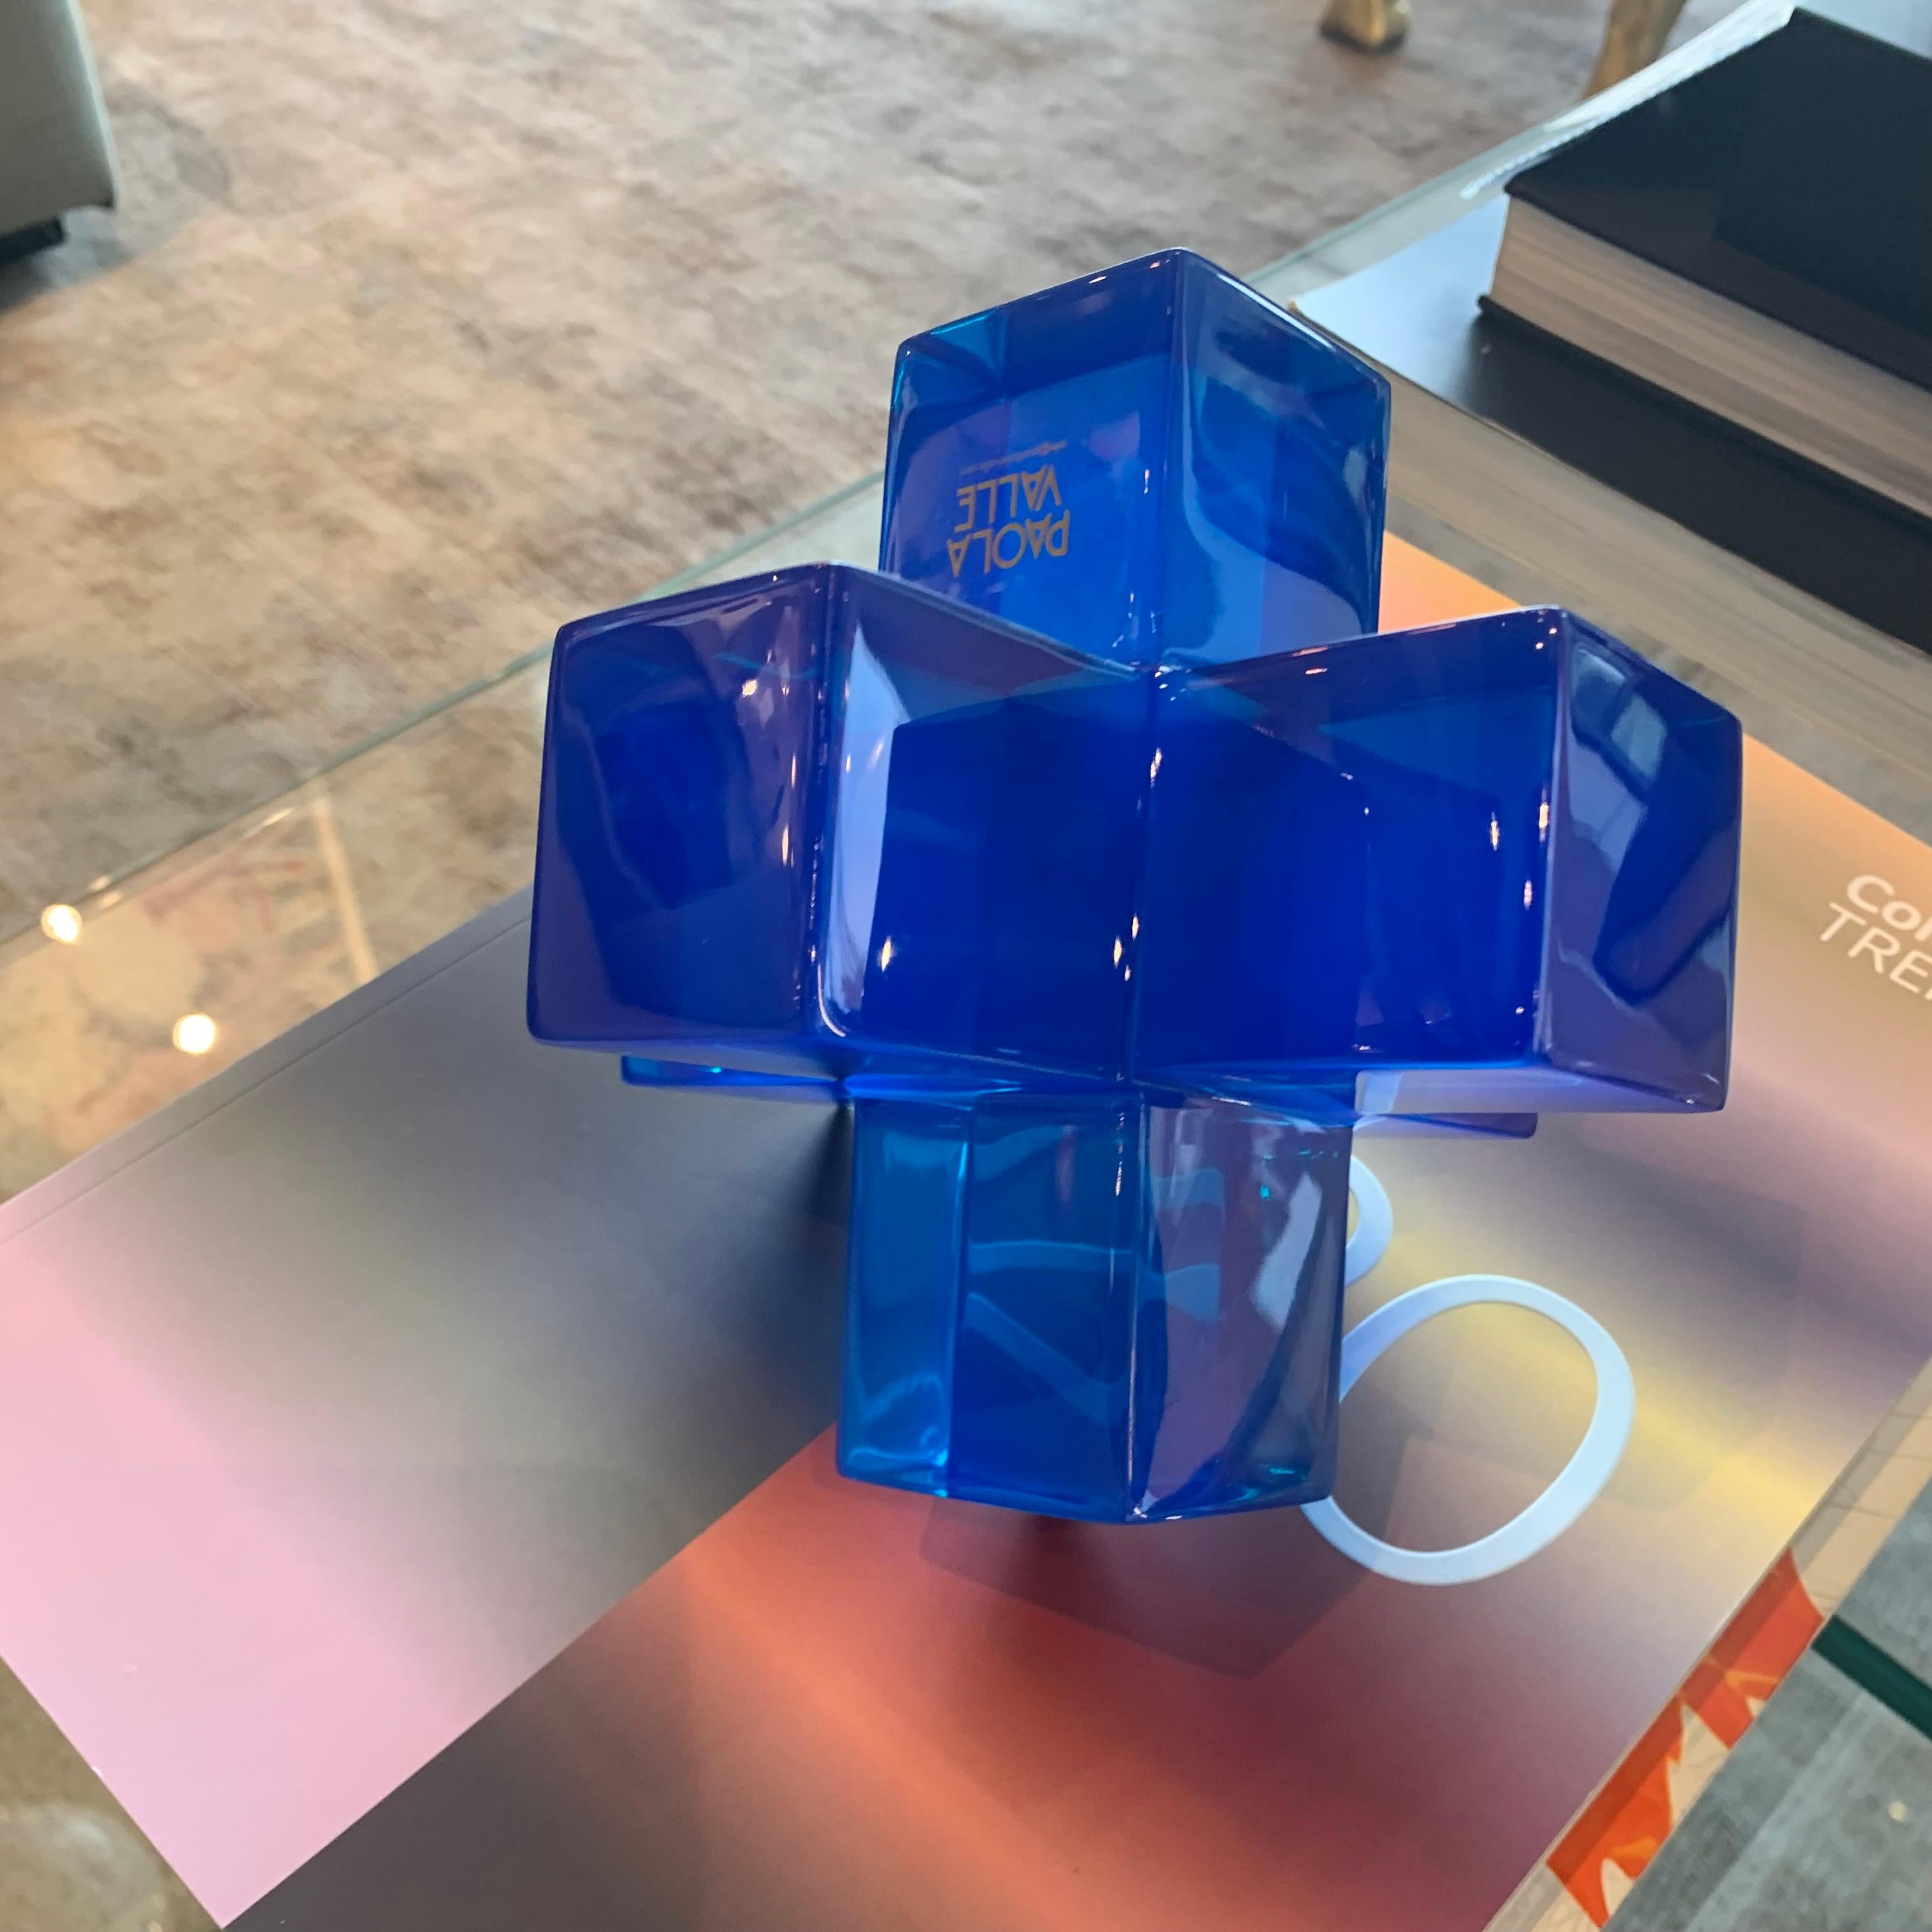 Modern Geometric Sculpture in Polished Blue Resin by Paola Valle